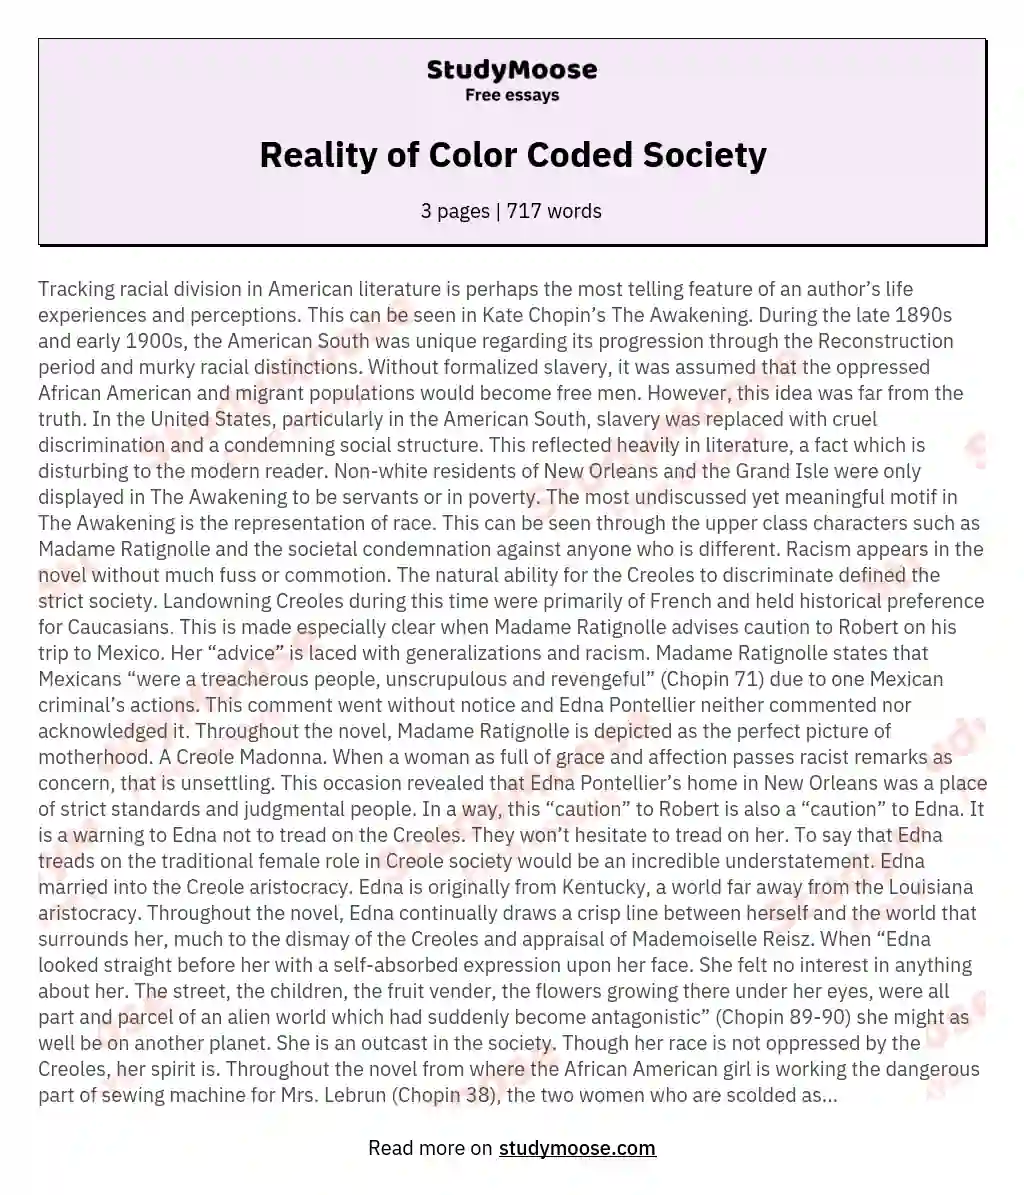 Reality of Color Coded Society essay